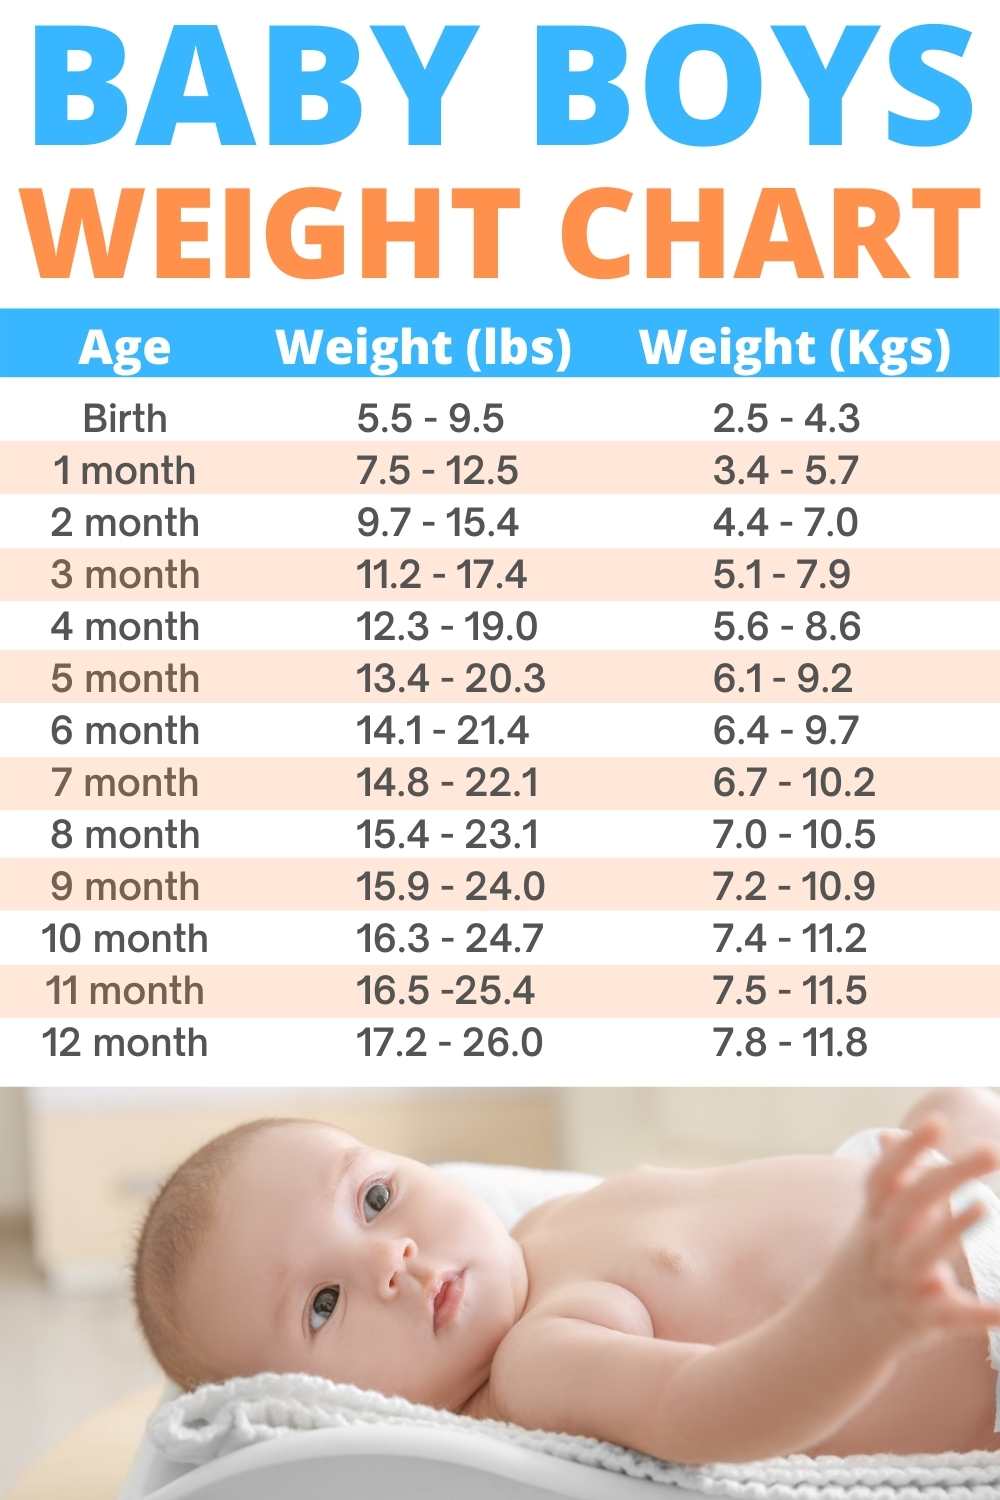 38 Weeks Baby Weight Chart